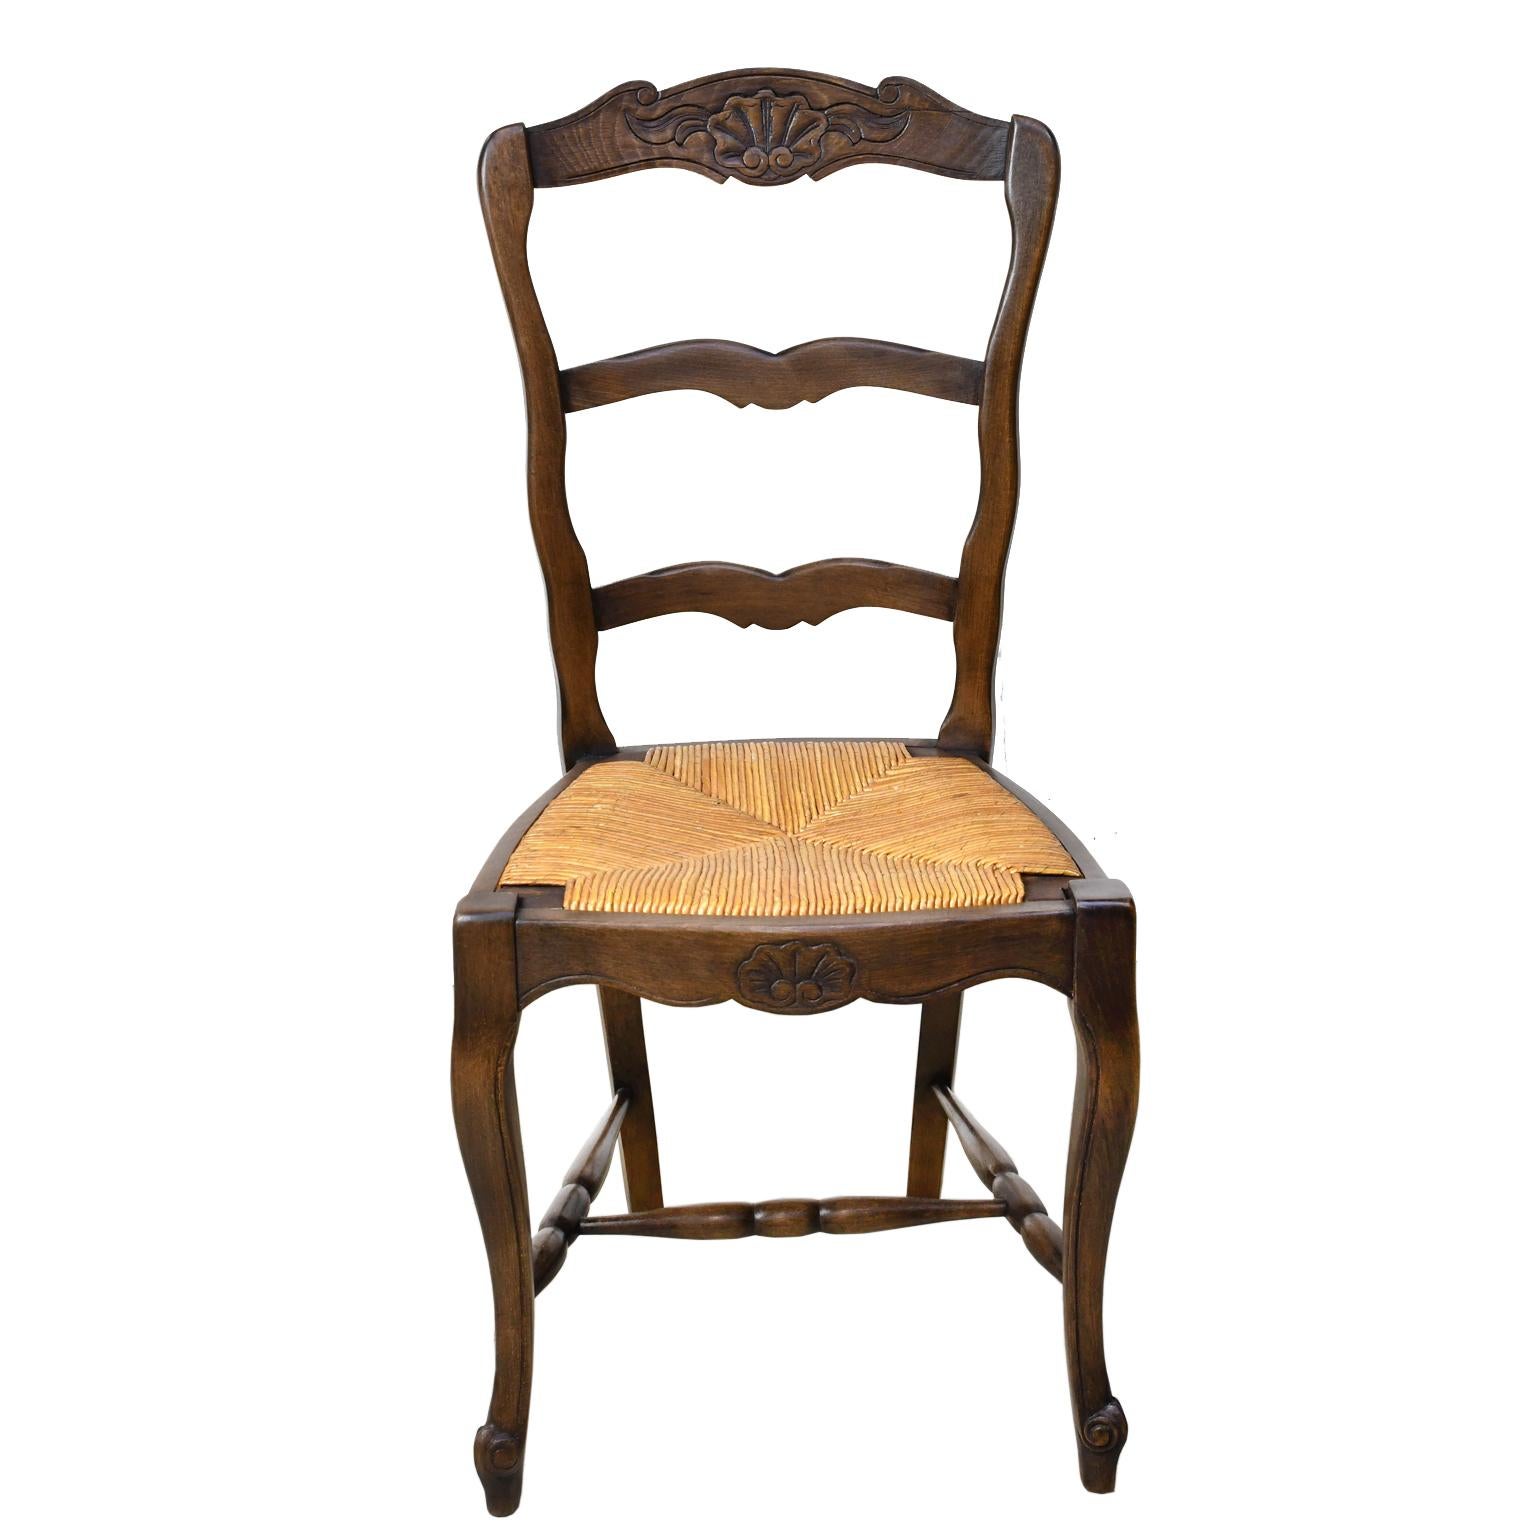 A very nice set of early 20th century French Provincial style ladder back chairs in a walnut finish with removable rush seats. All chairs are in very good condition, they have been restored and waxed. High backs are particularly